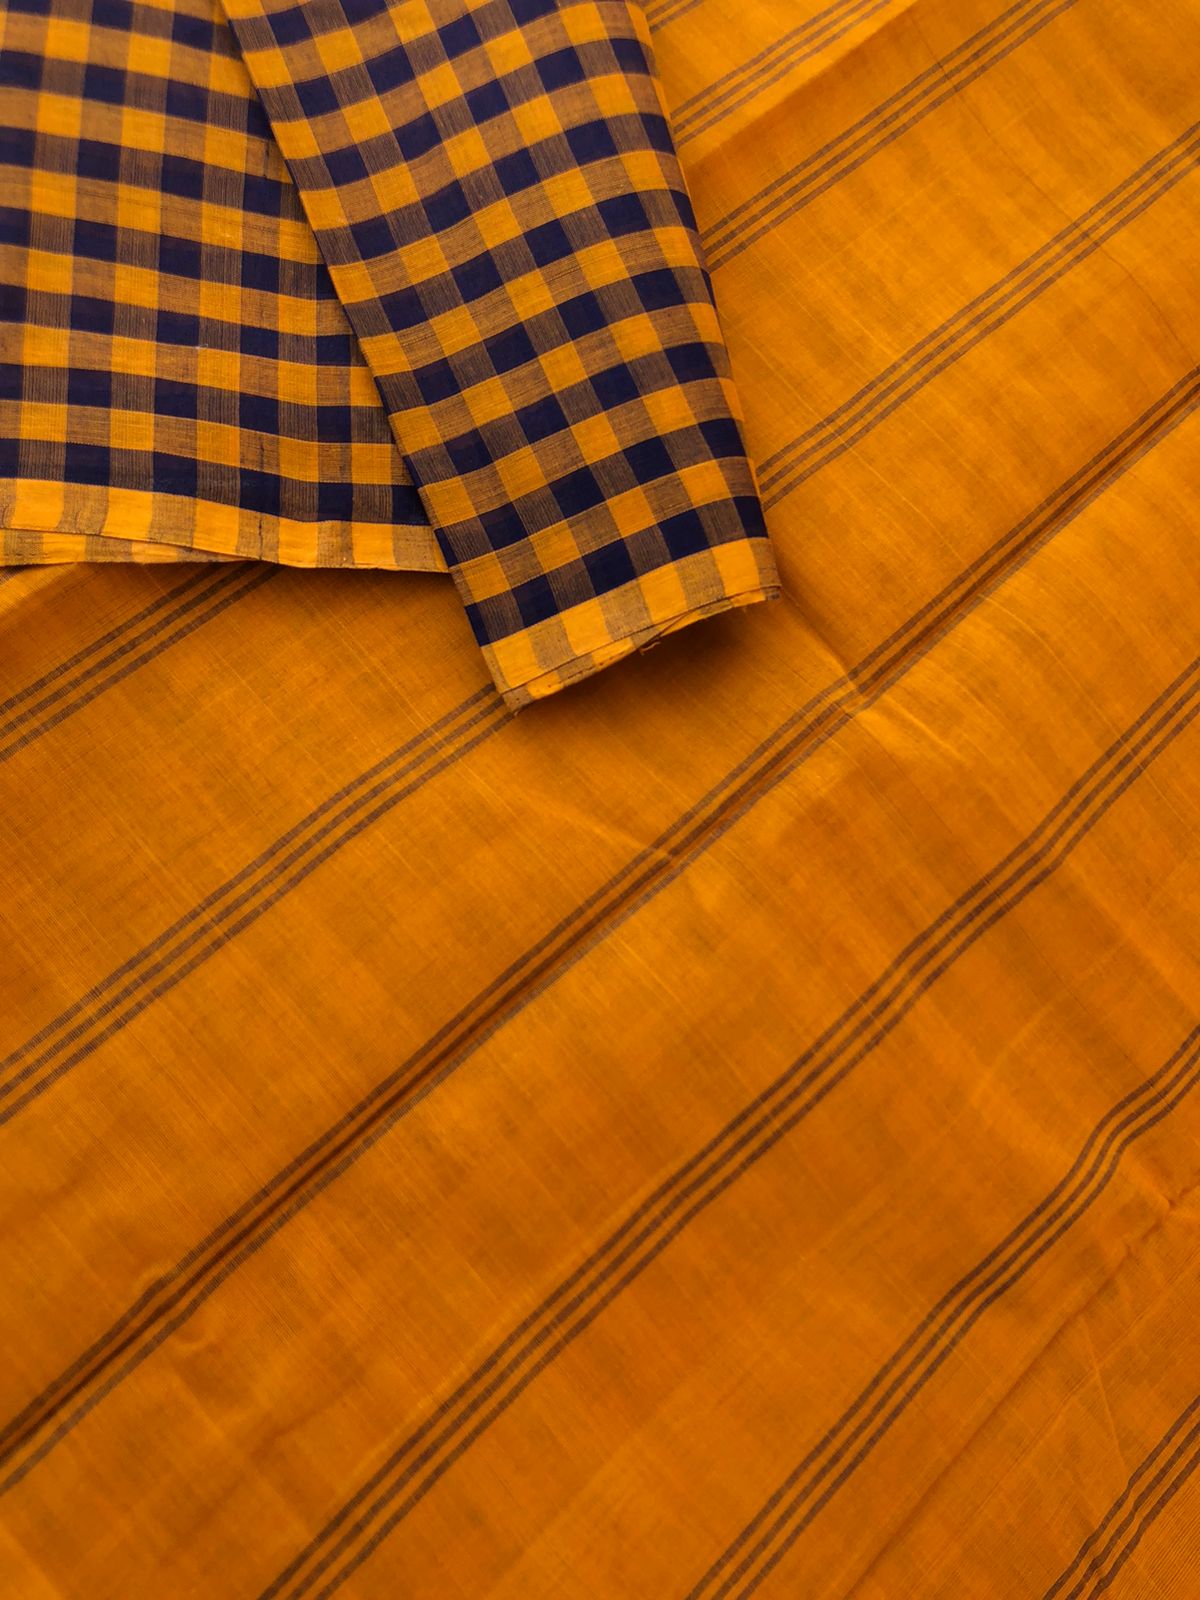 Pragatham - Contrast Play - mustard and navy blue chex